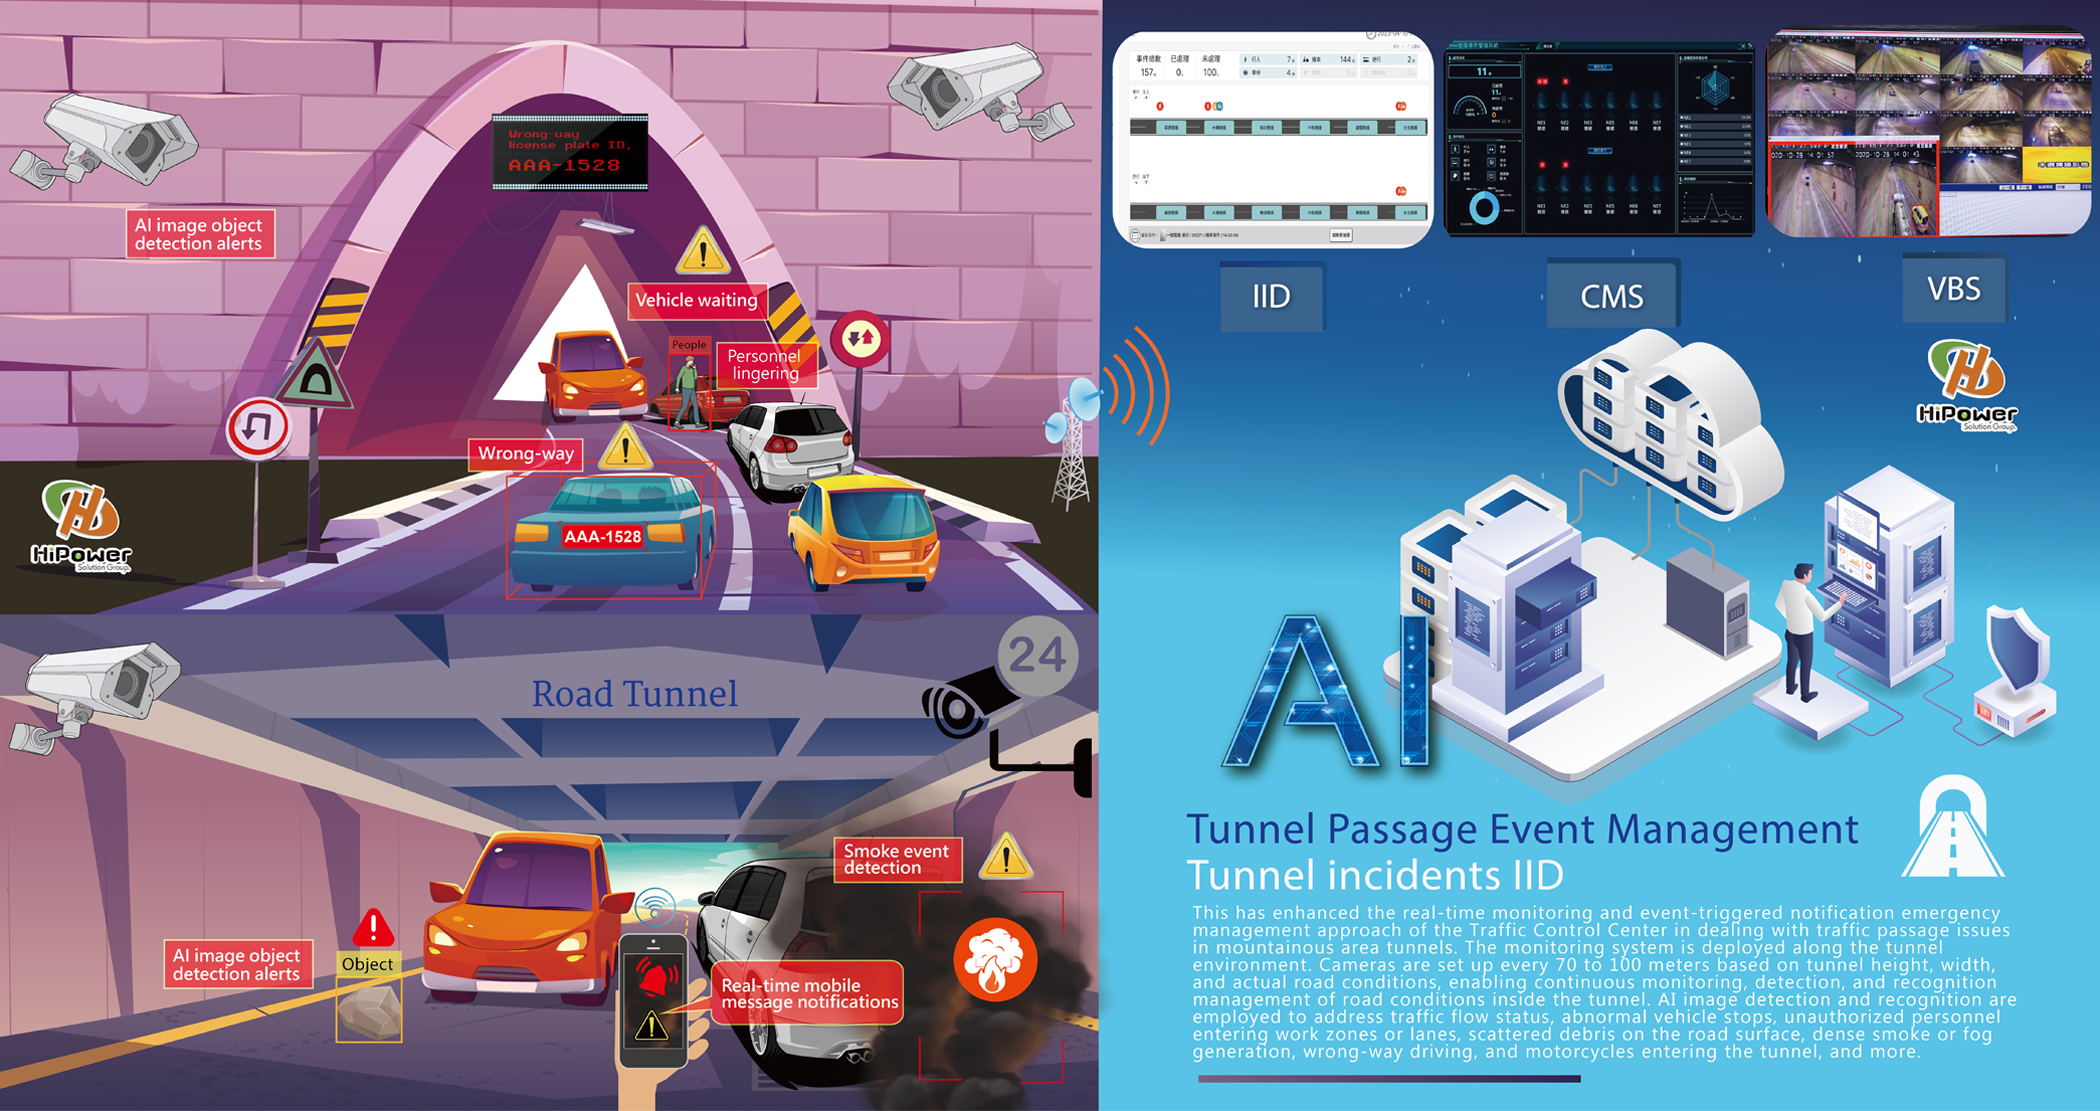 IIDS Tunnel Incident Information Detection